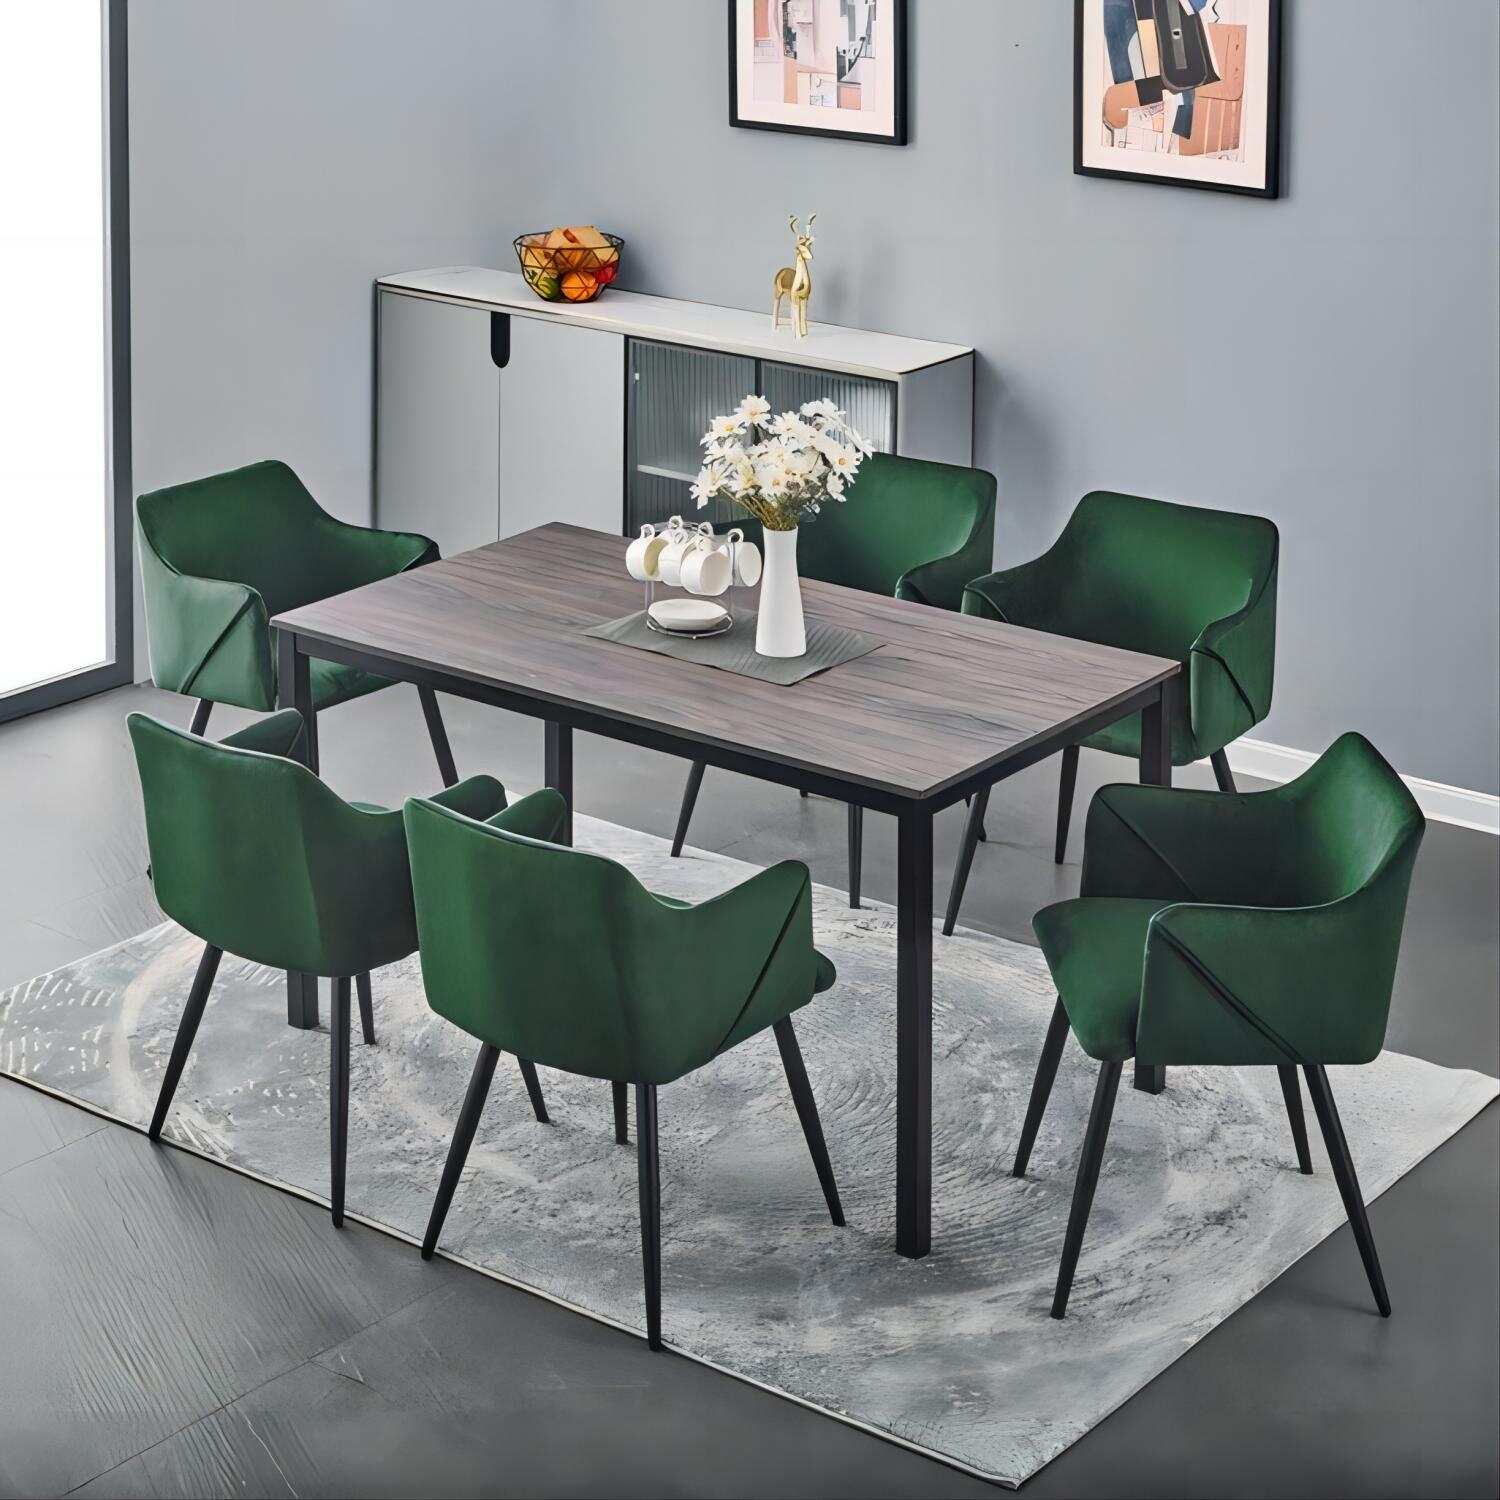 Rectangular Dining Table Kitchen Table w/ MDF Desktop Seats up to 4-6